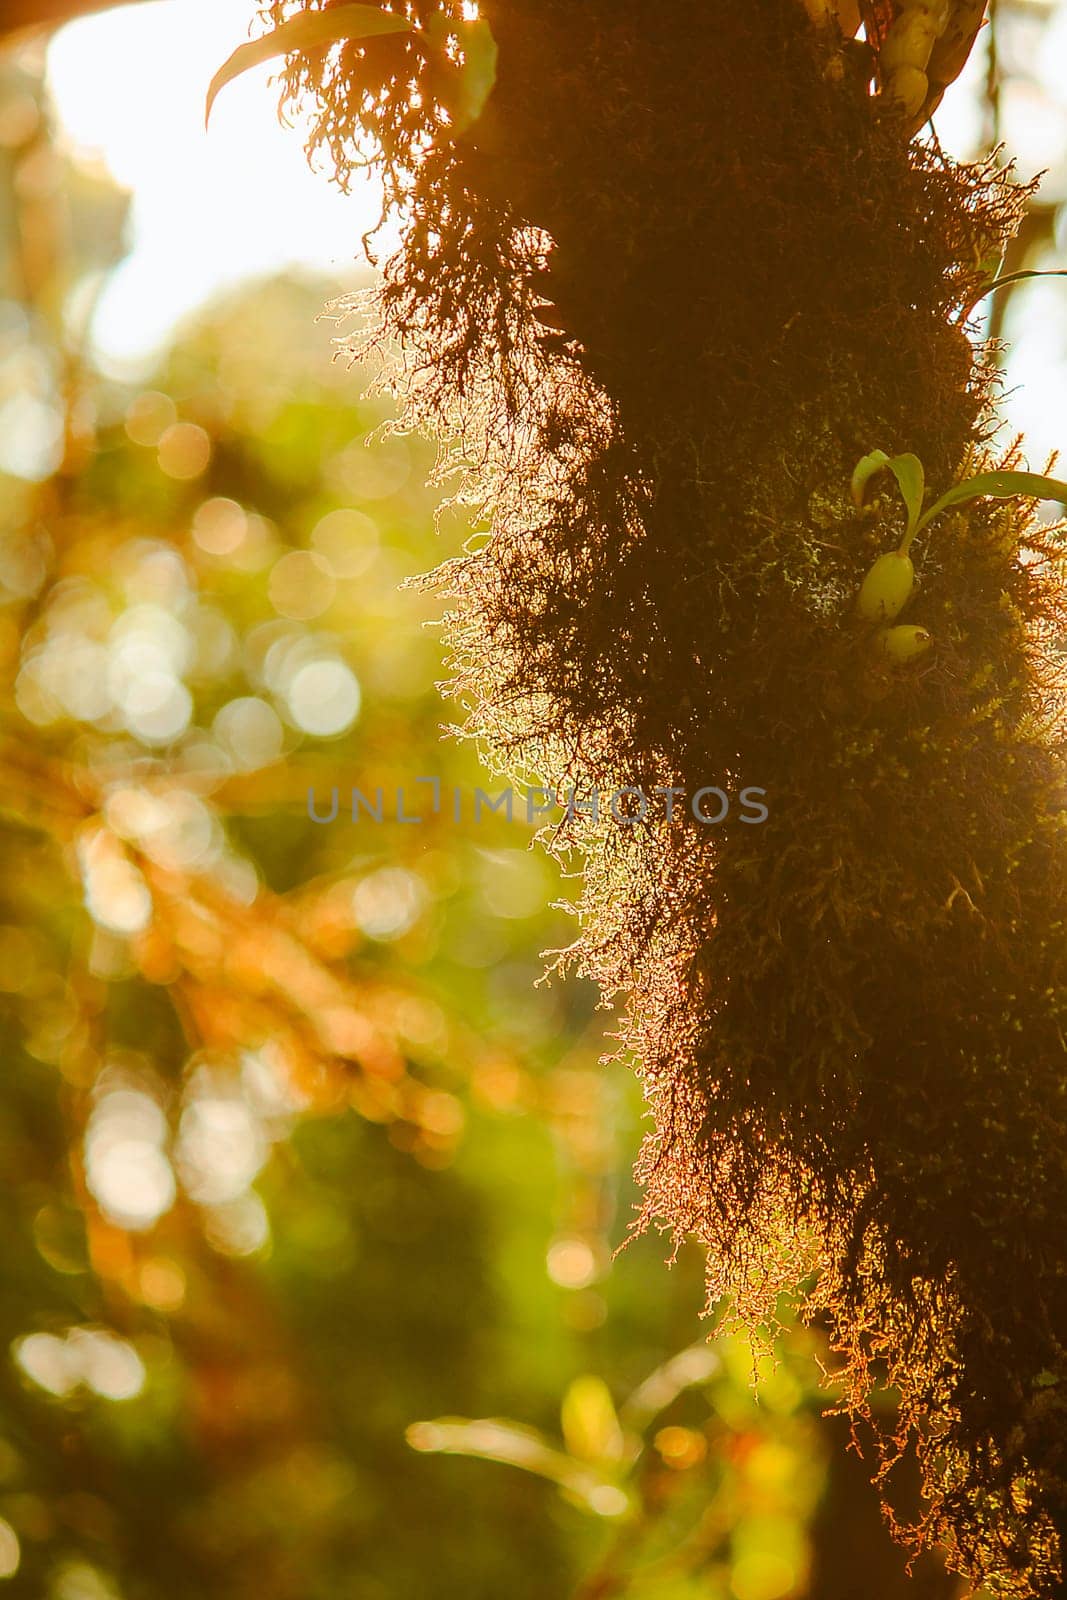 The sunrise light that shines on Moss on the tree by Puripatt